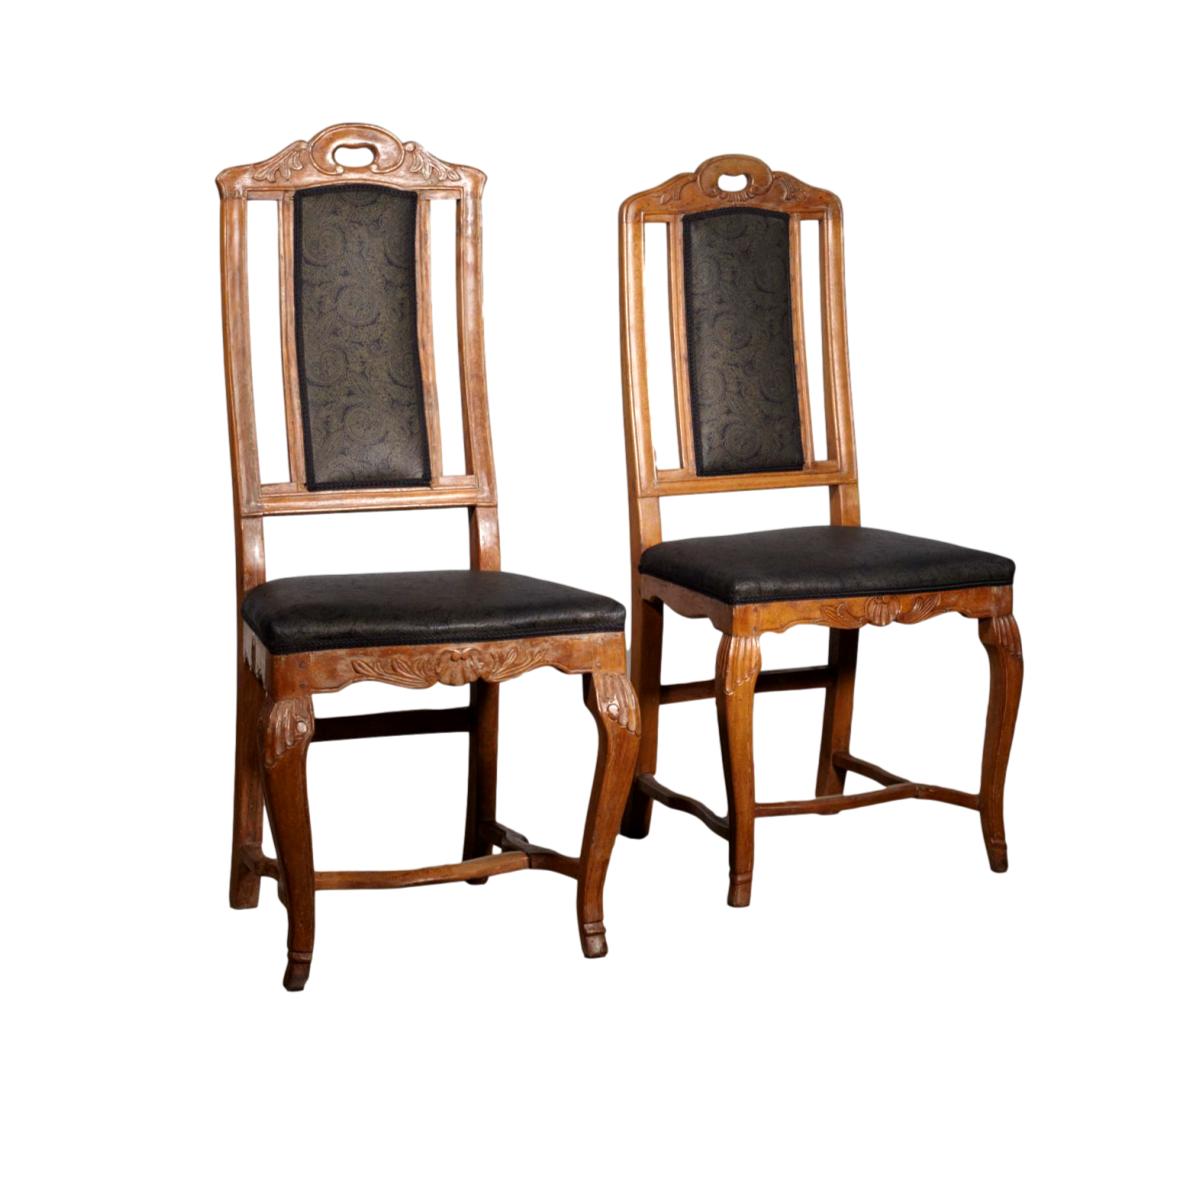 Danish Carved Beech Regency Chairs Circa 1750 - A Pair